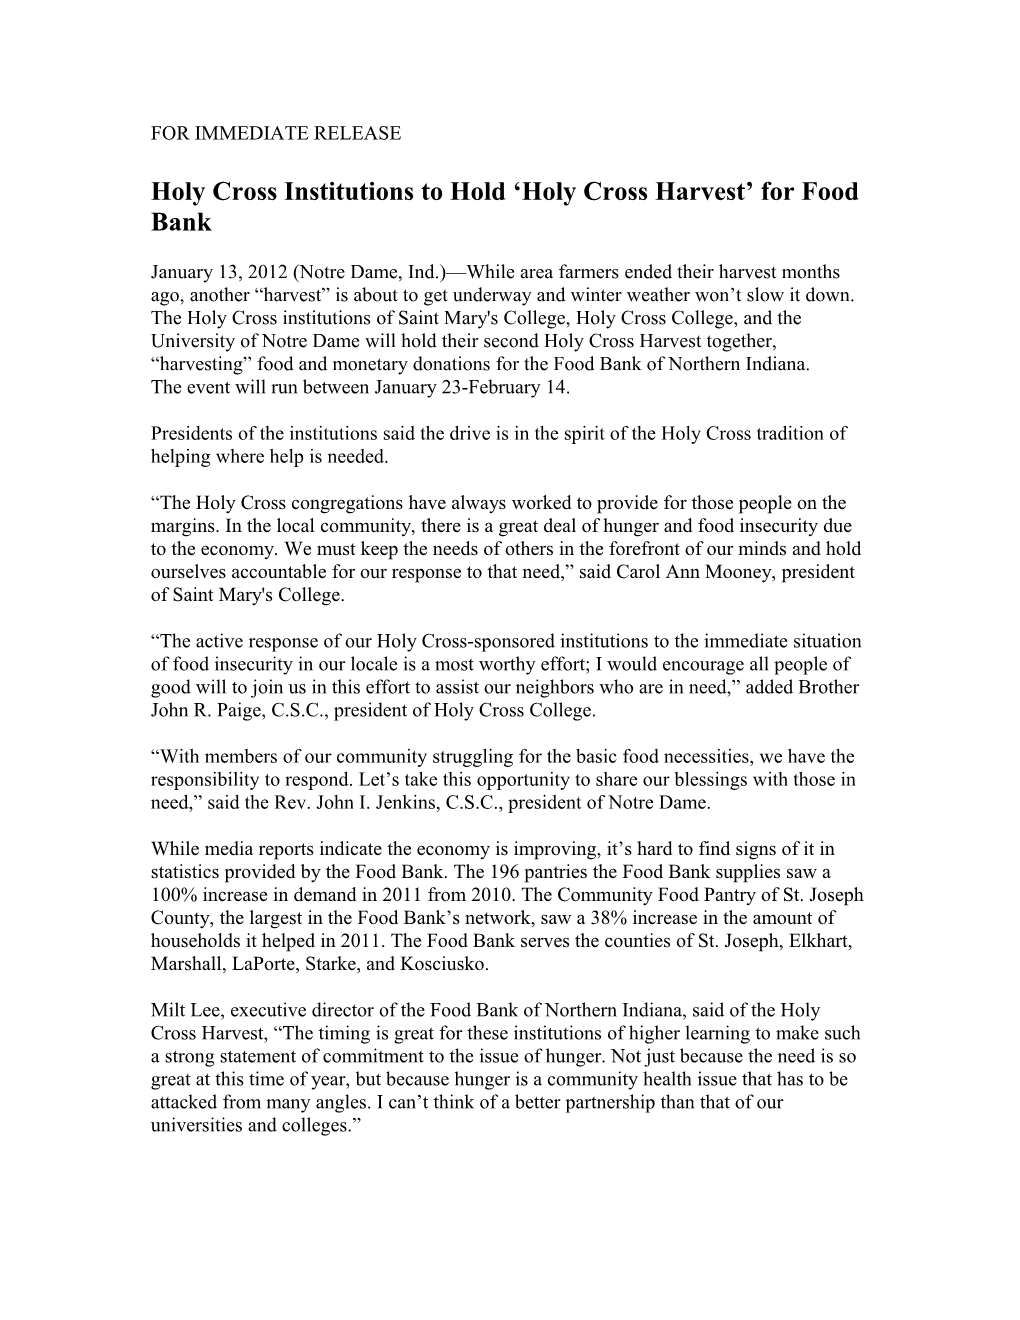 Holy Cross Institutions to Hold Holy Cross Harvest for Food Bank